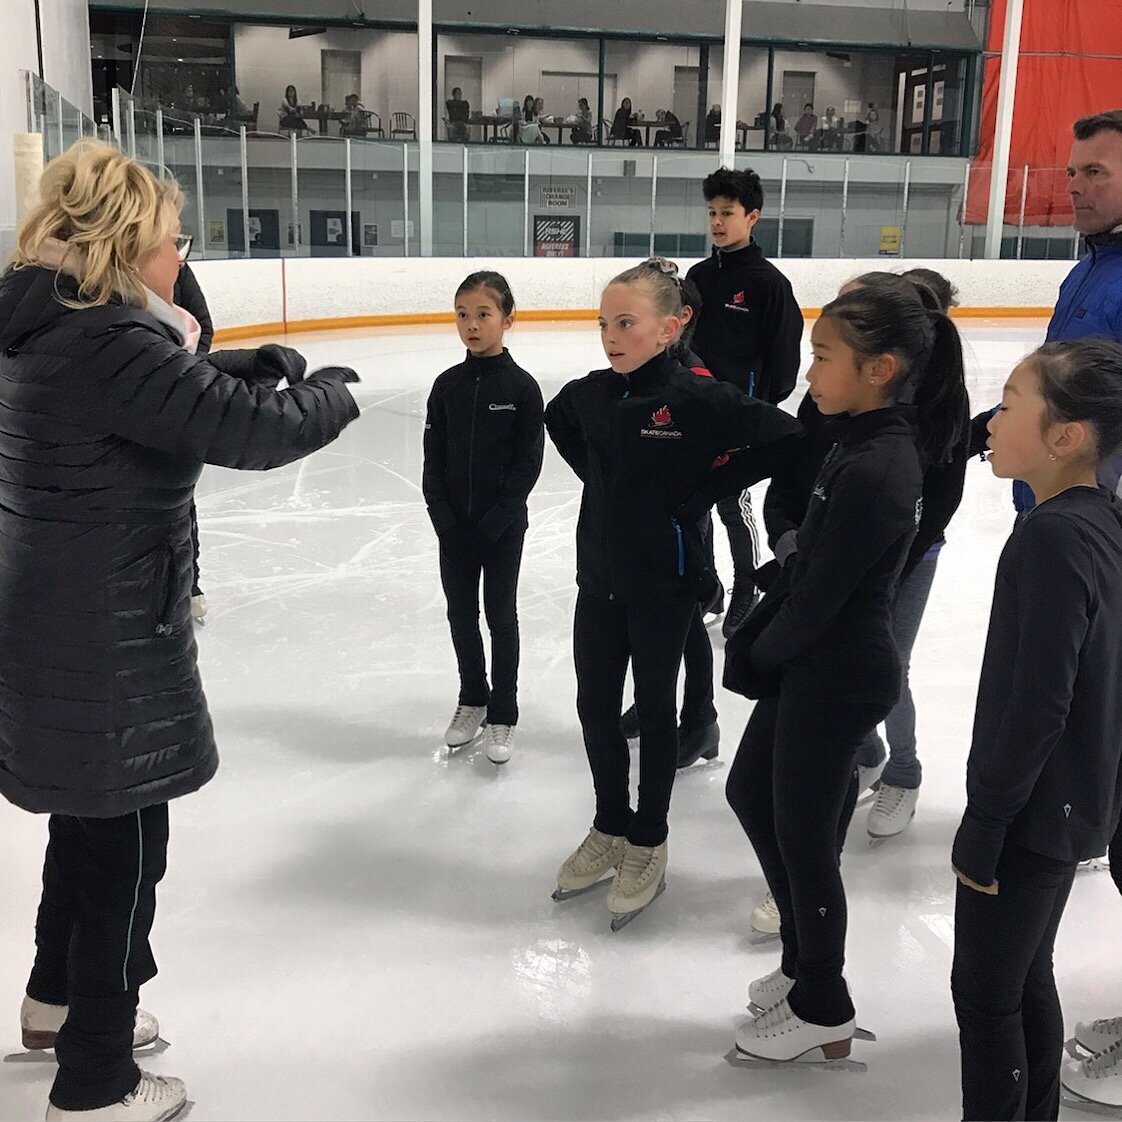  Joanne with Scott Davis working with BC Team skaters at the BC Team Development camp 